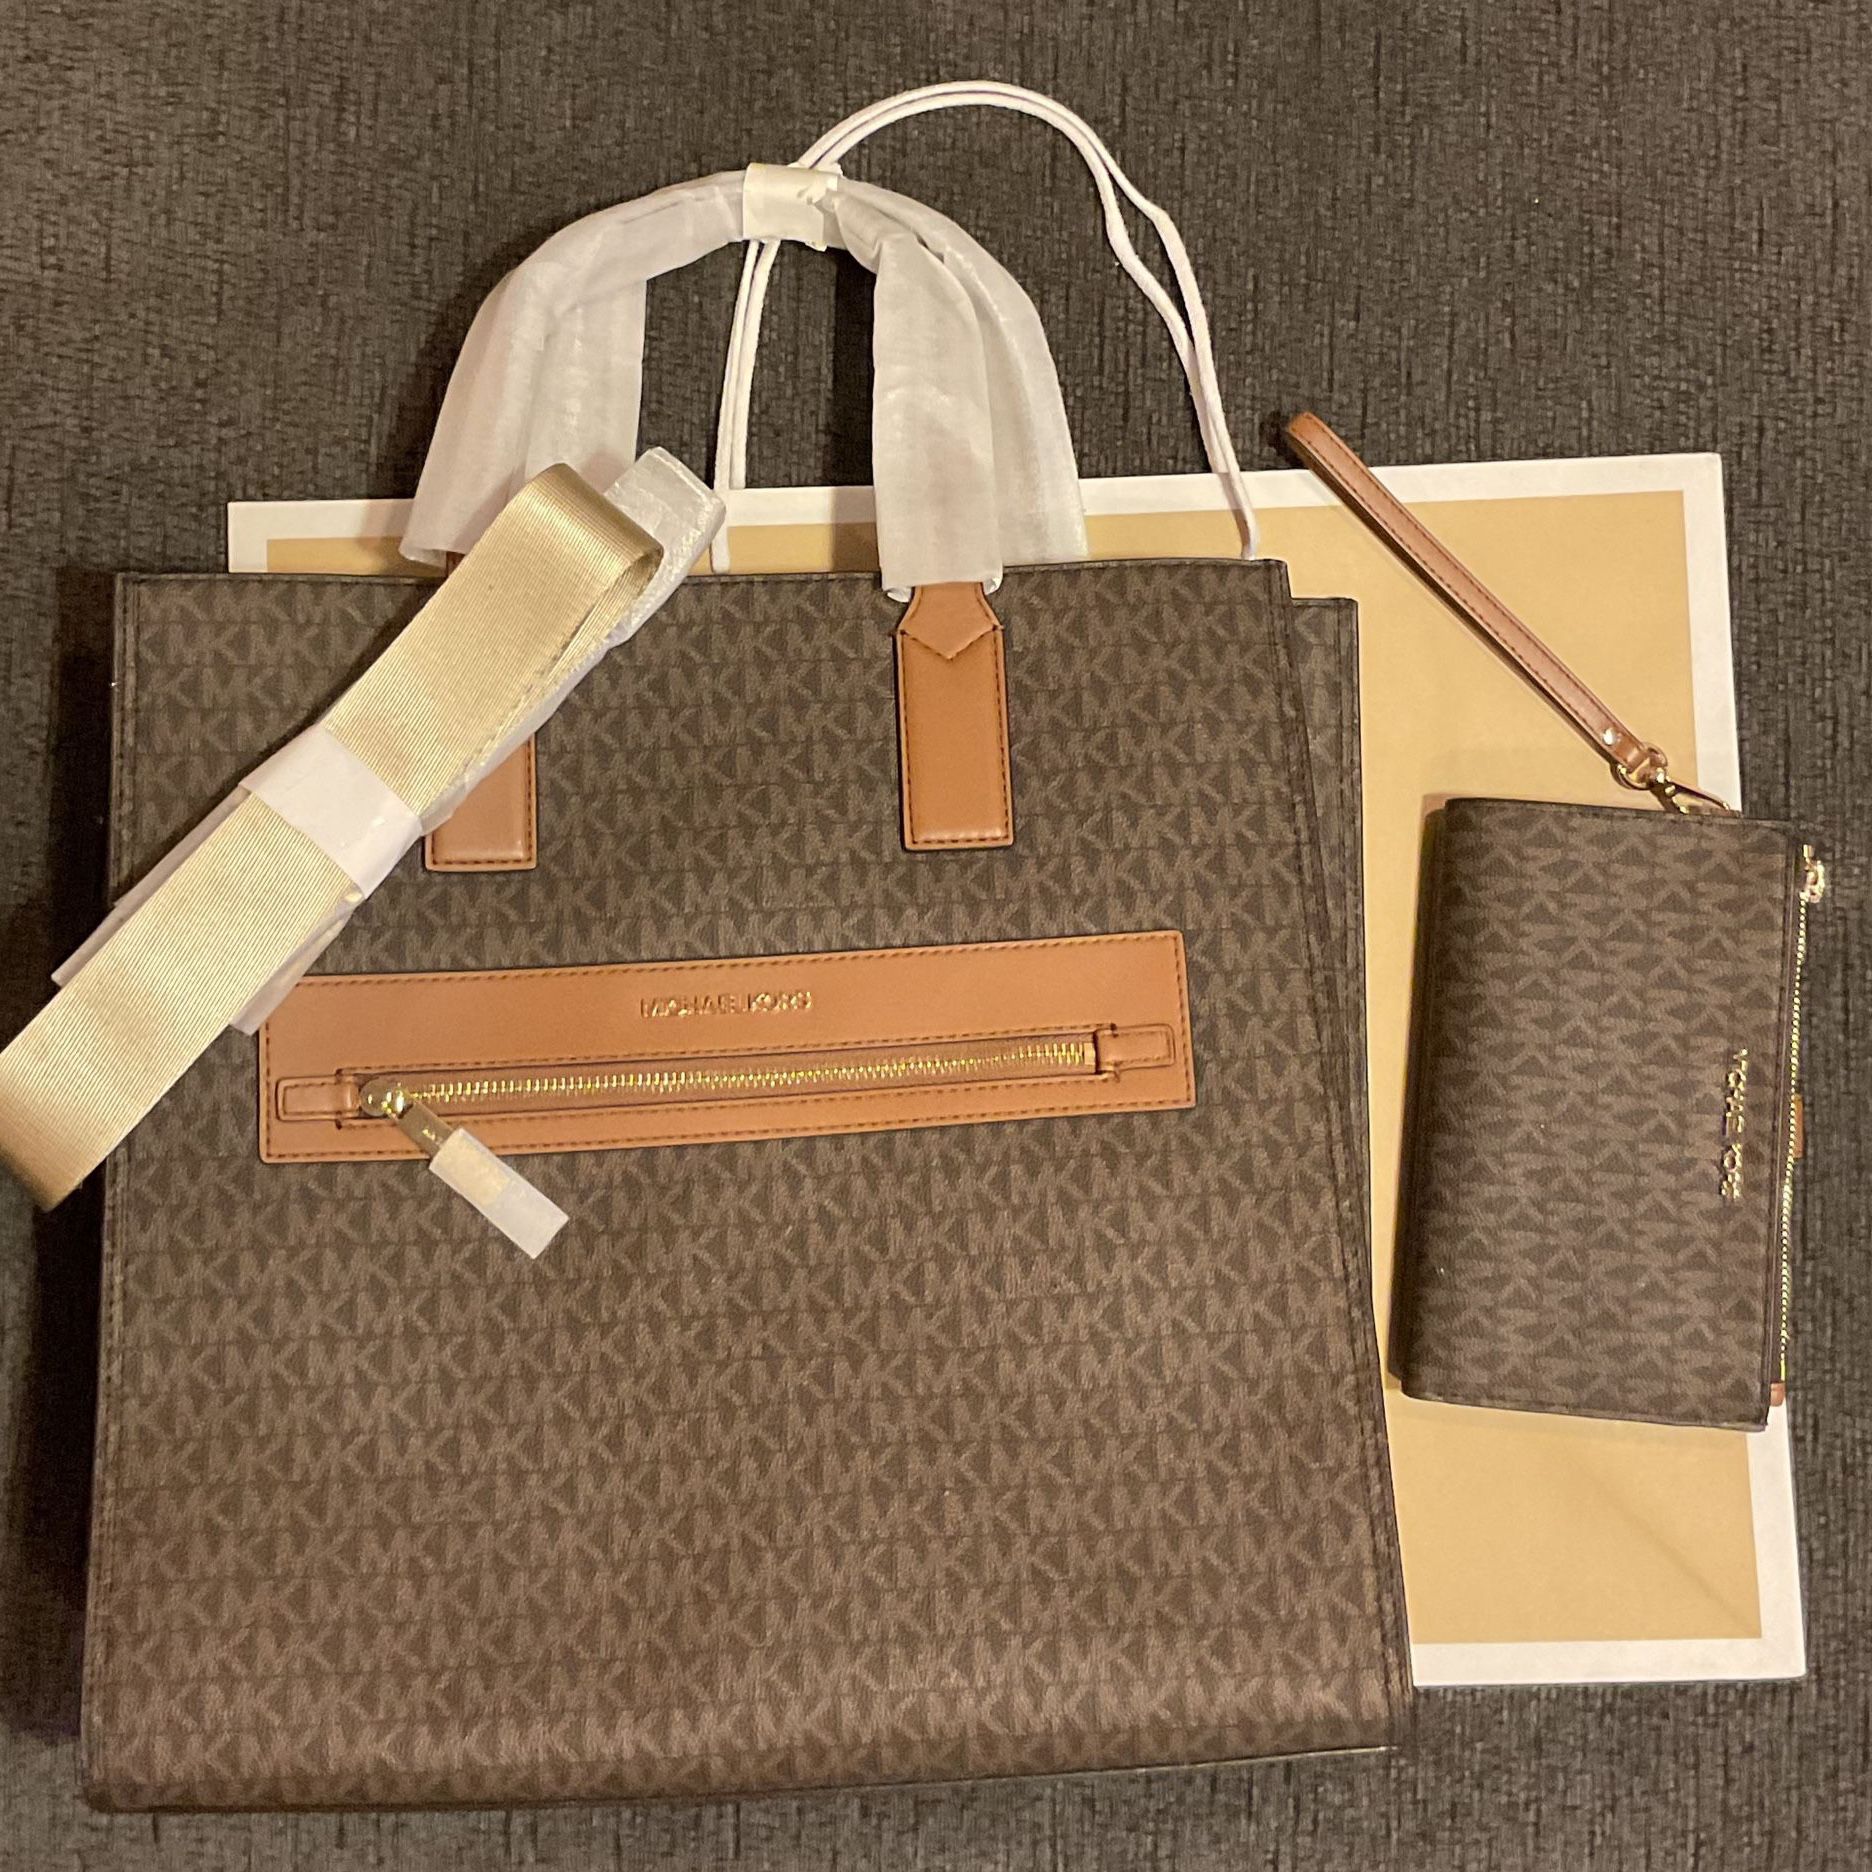 Micheal Kors Tote Bag And Wallet Combo Deal